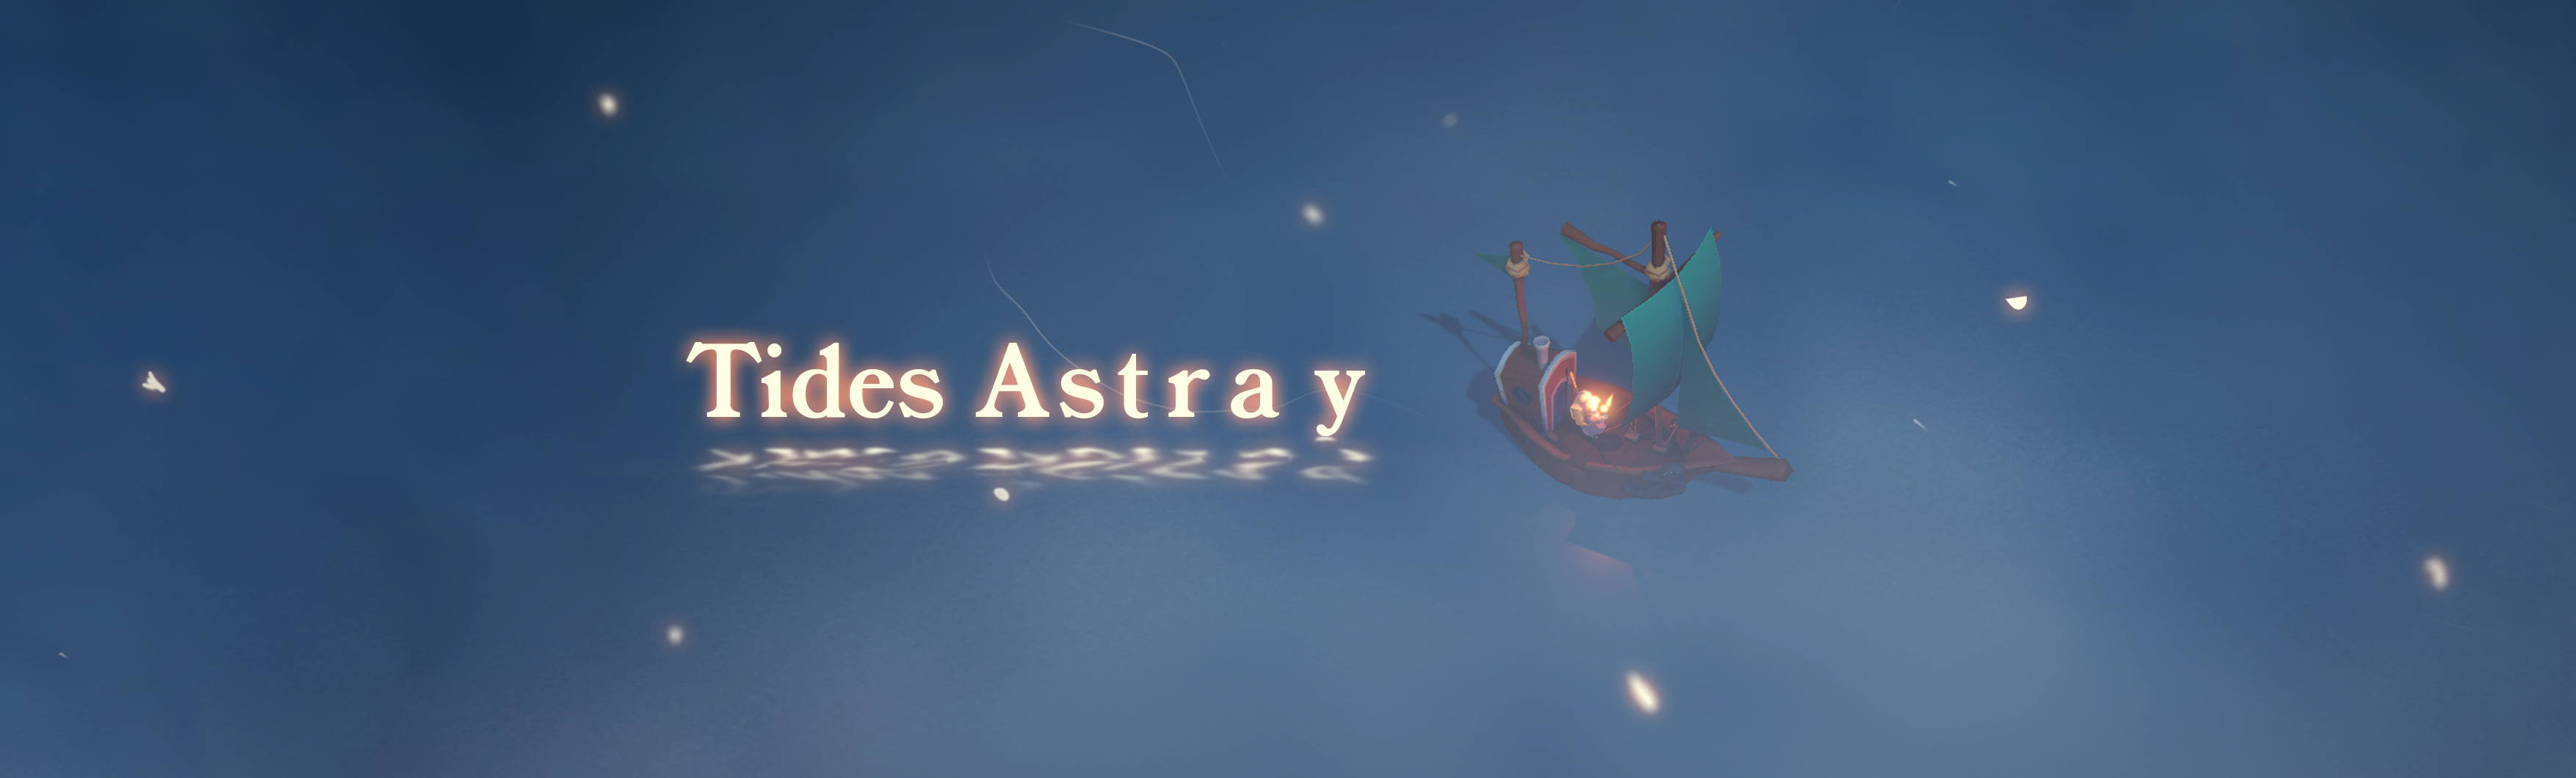 Banner with text "Tides Astray" featuring a small boat in a dark misty sea, and small person with a little light on deck.